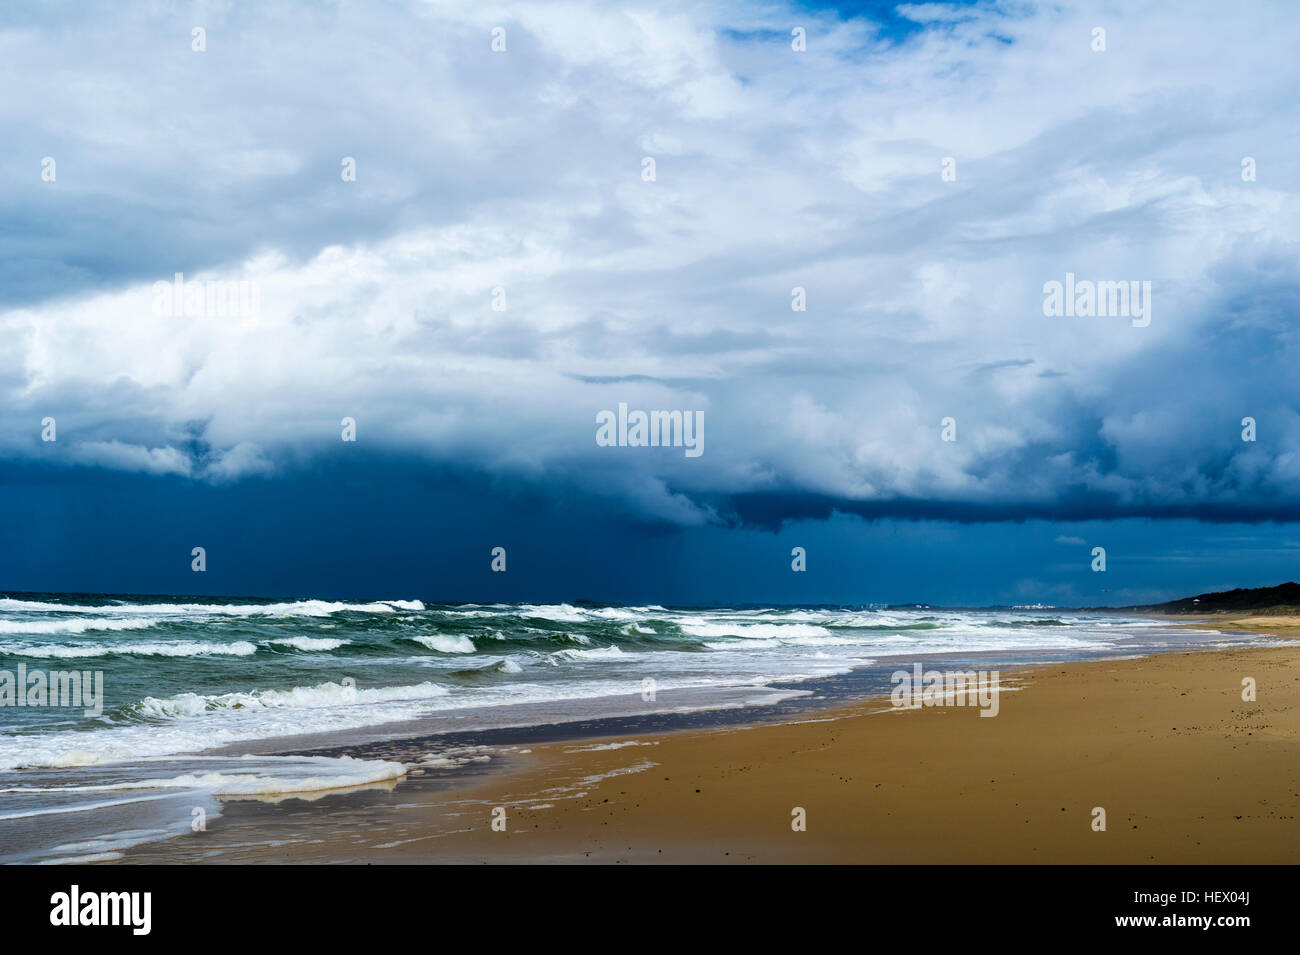 Ominous black storm clouds roll in over waves rolling onto an empty beach. Stock Photo